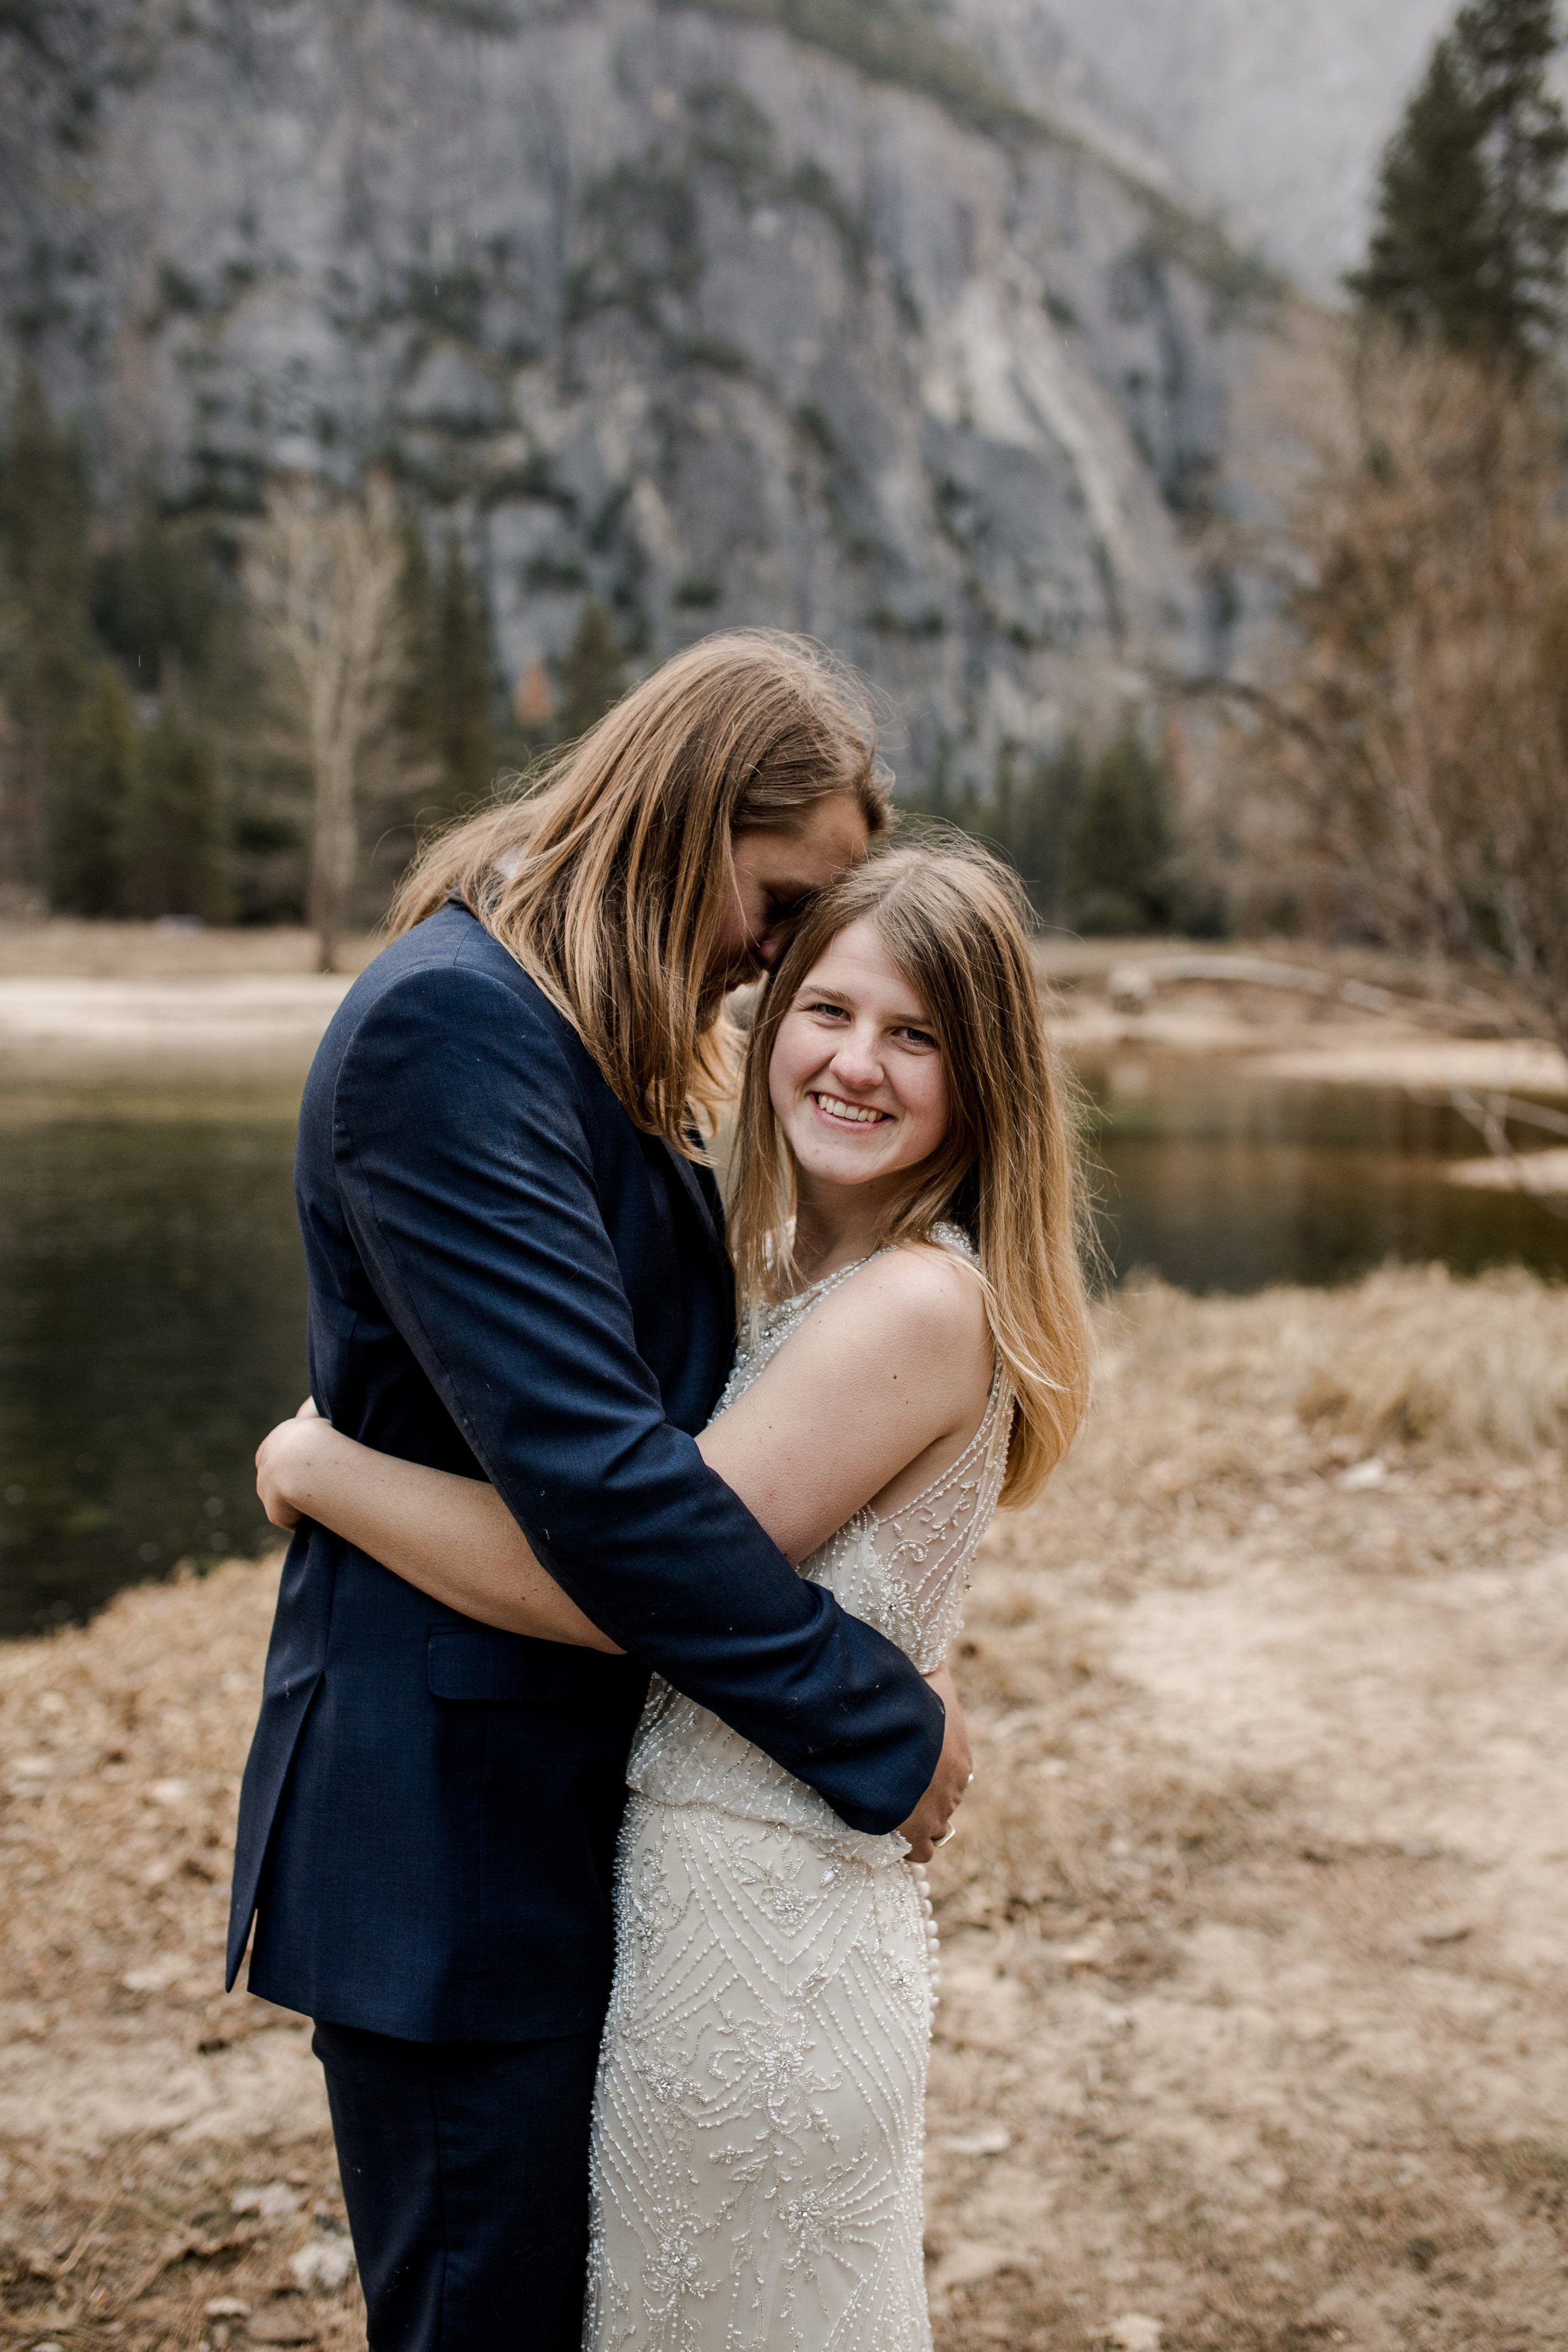 nicole-daacke-photography-yousemite-national-park-elopement-photographer-winter-cloud-moody-elope-inspiration-yosemite-valley-tunnel-view-winter-cloud-fog-weather-wedding-photos-37.jpg